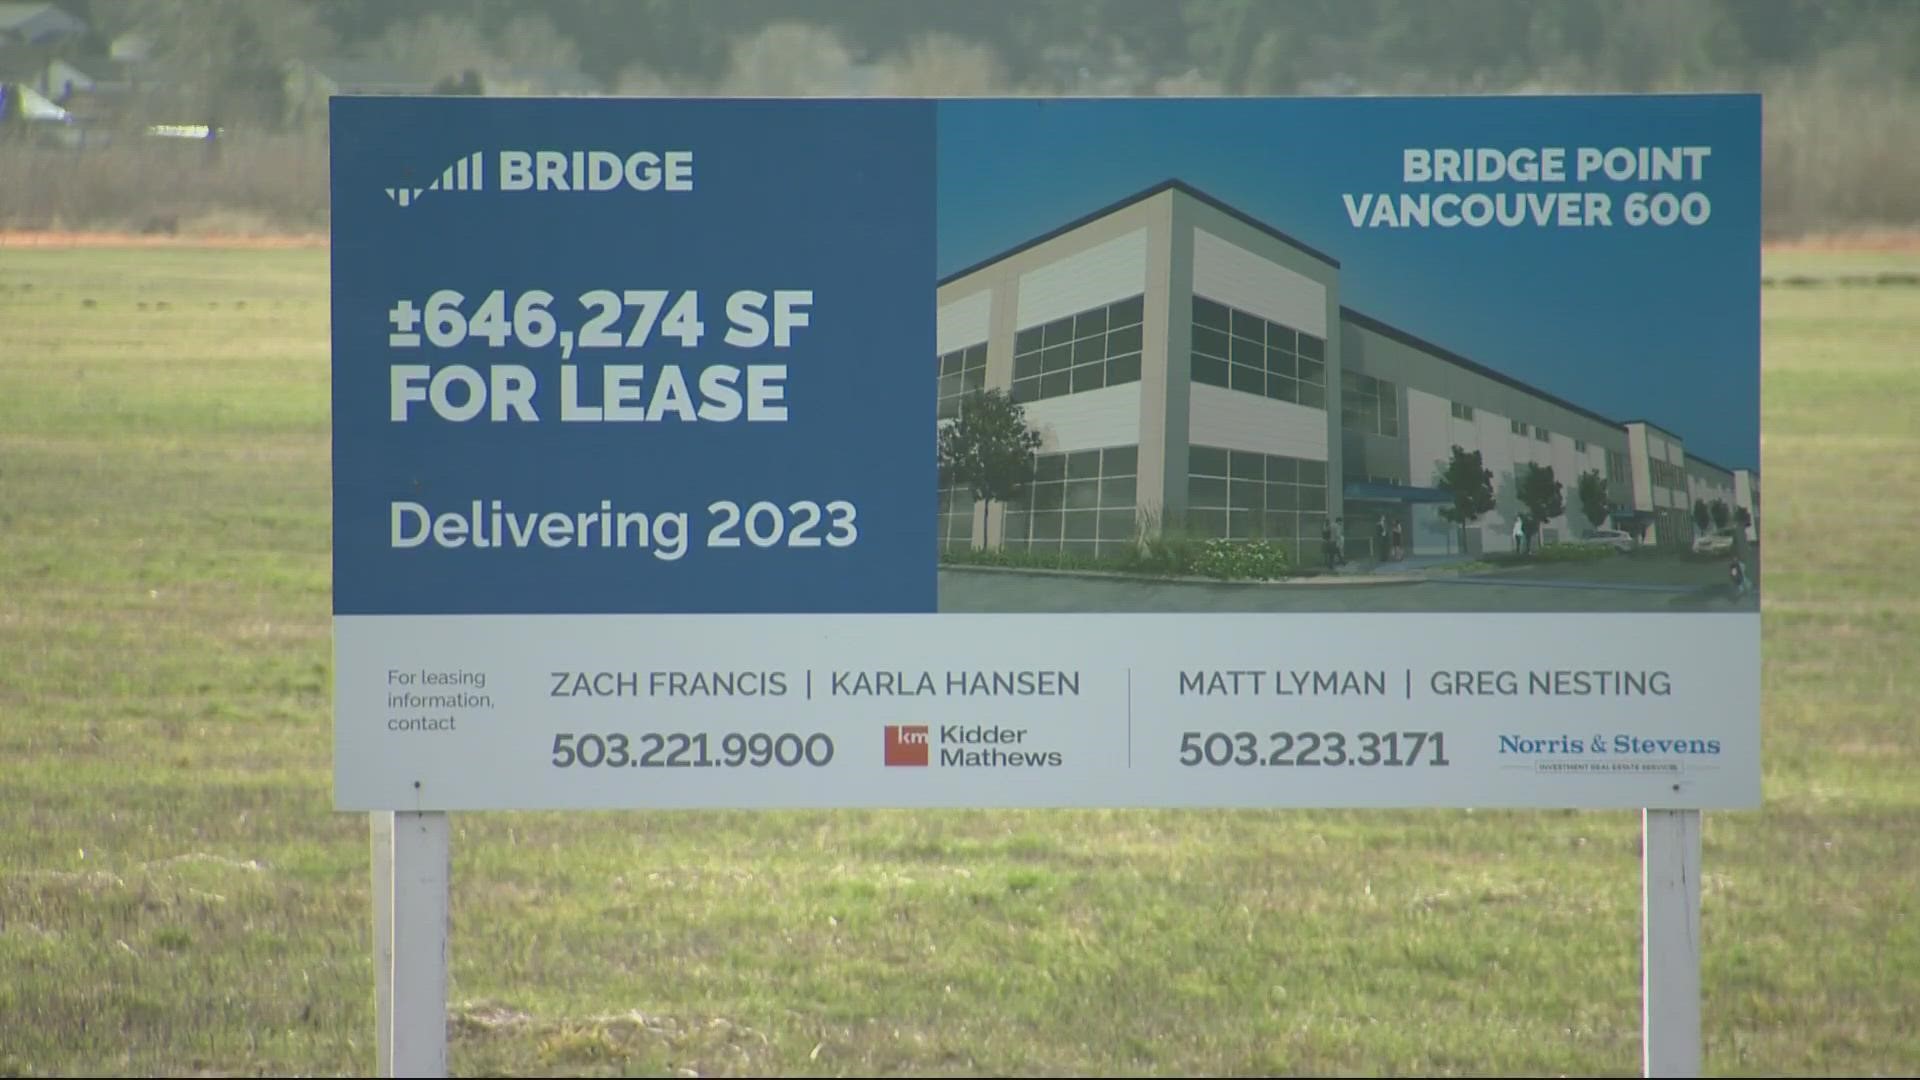 Applications for warehouses by various developers have drawn concerns around neighborhood impact in Vancouver.